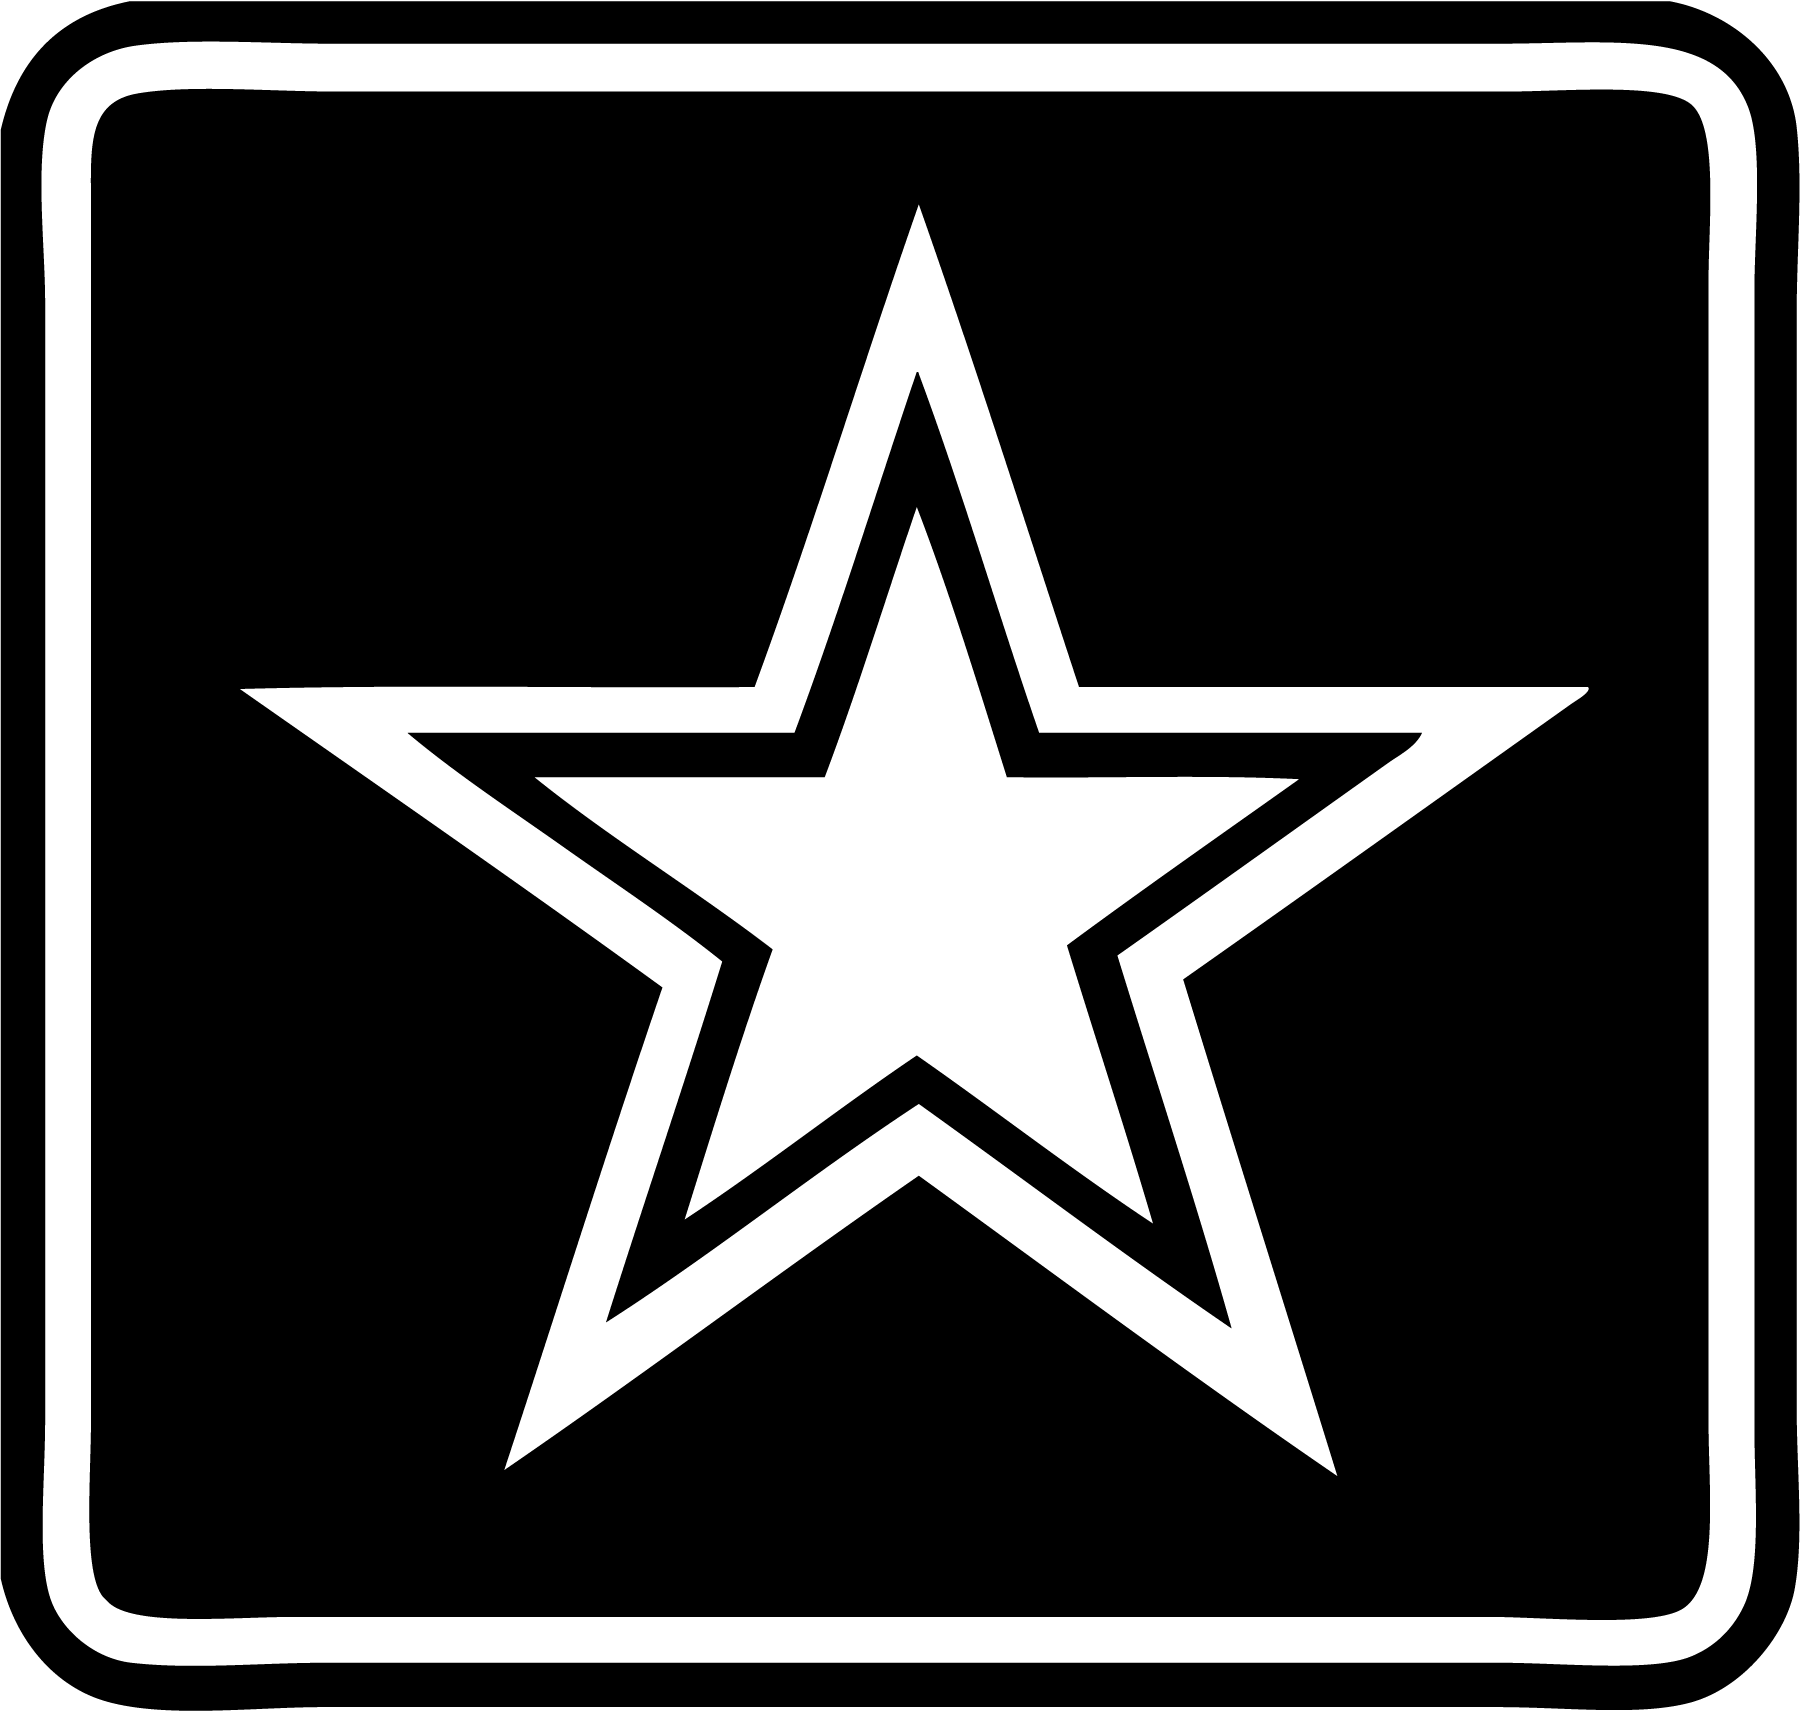 Black and White Star Logo - Naval star picture free library